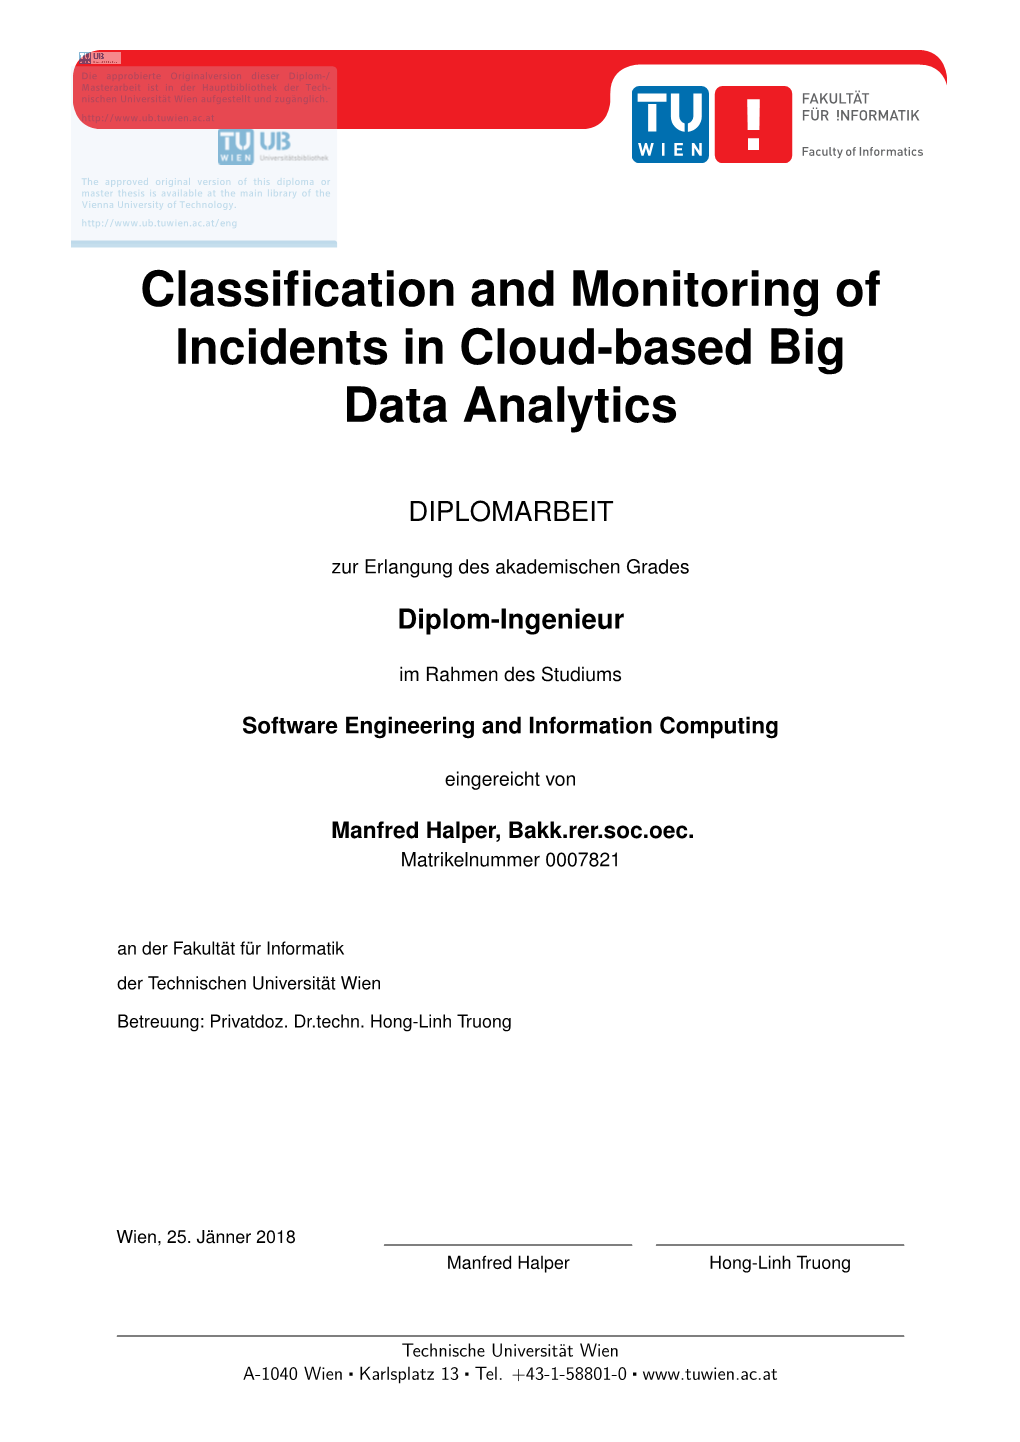 Classification and Monitoring of Incidents in Cloud-Based Big Data Analytics